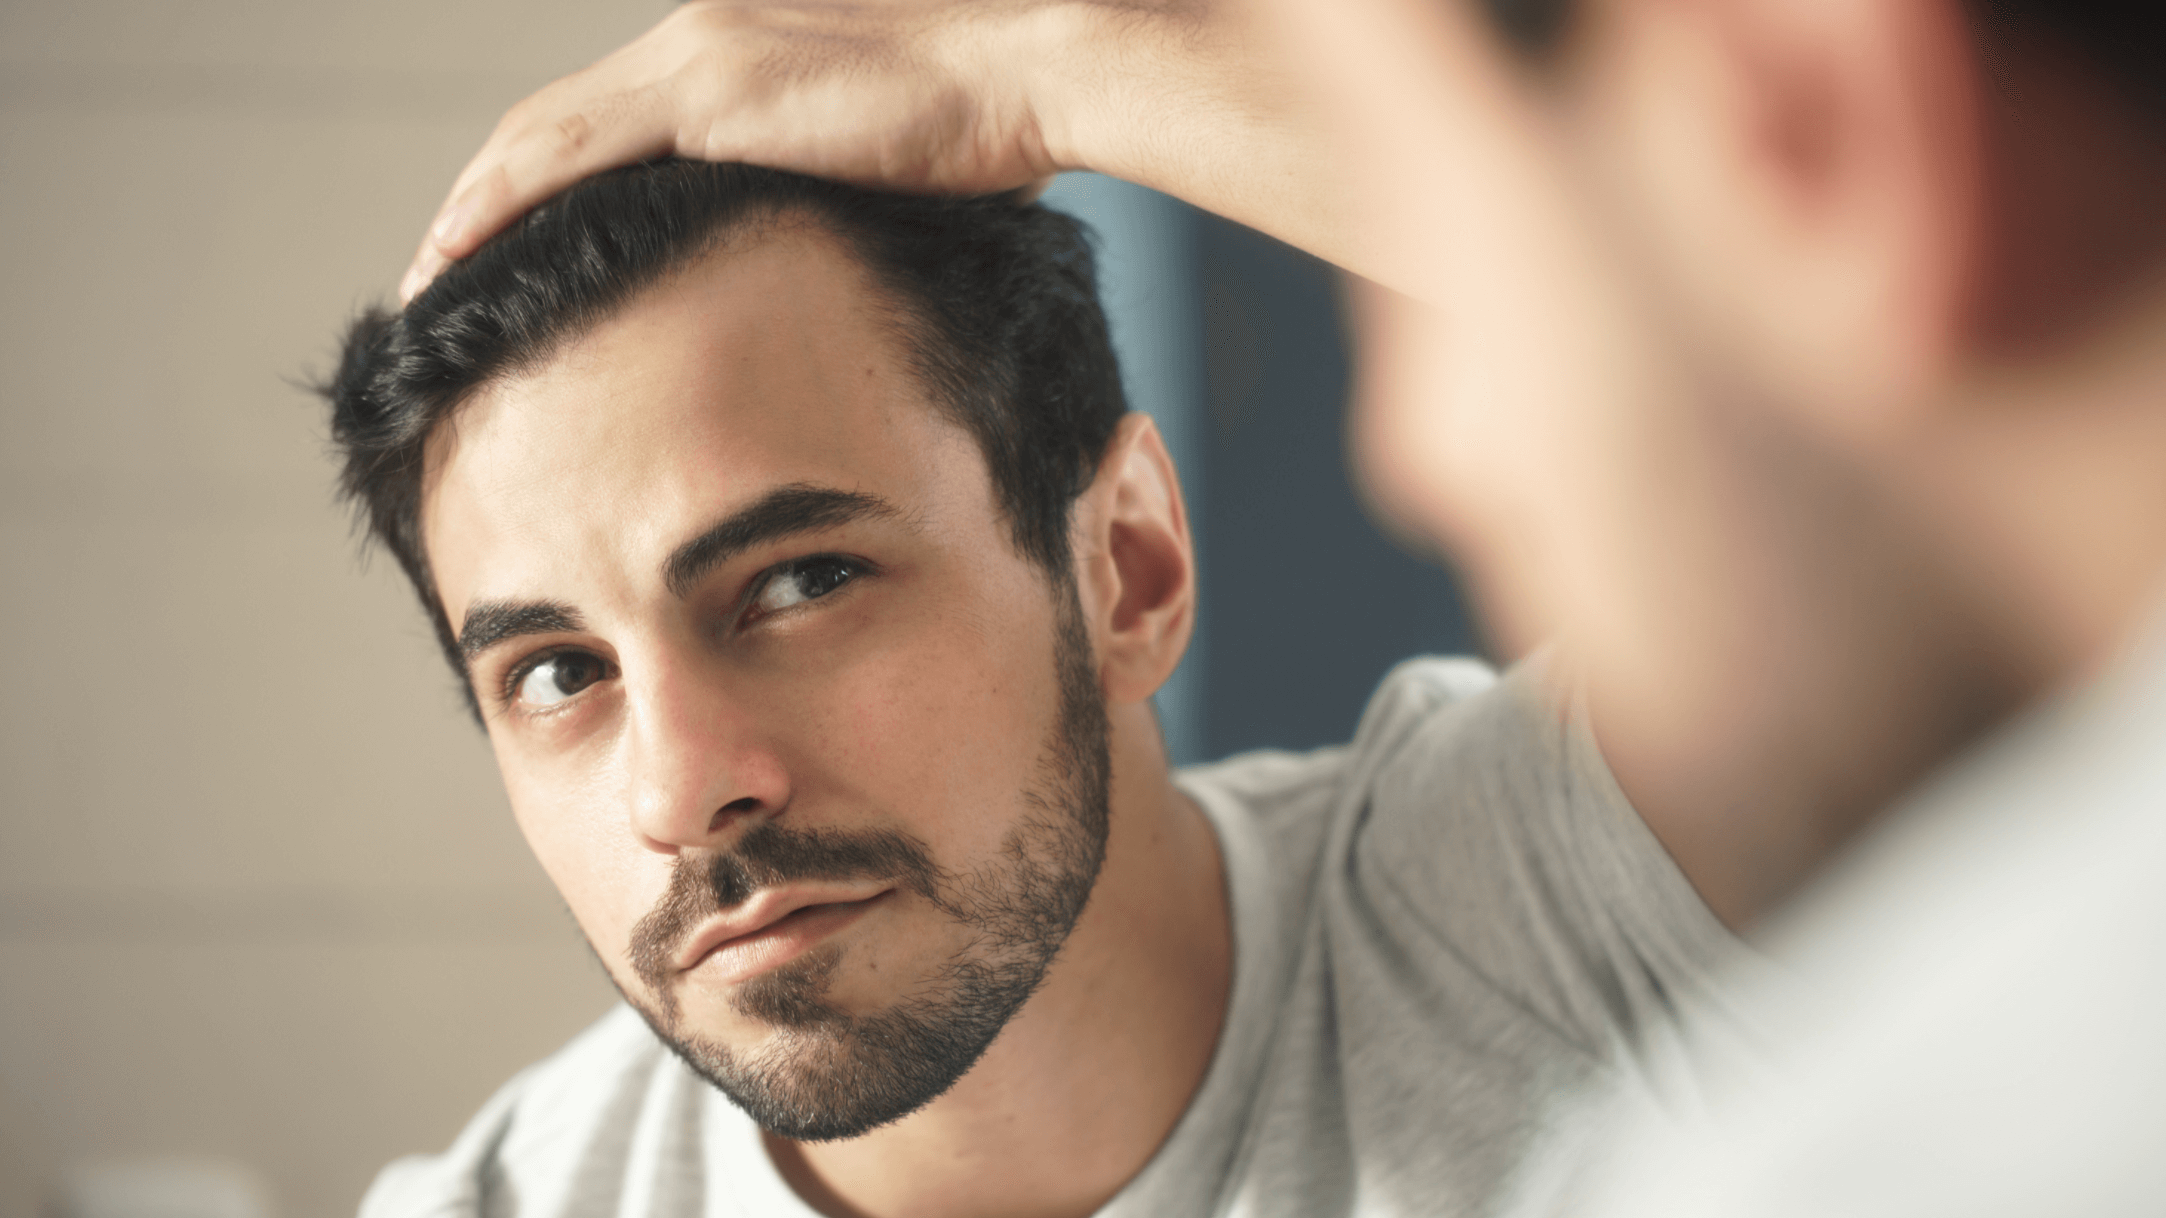 At What Age Does Early Hair Loss Start?